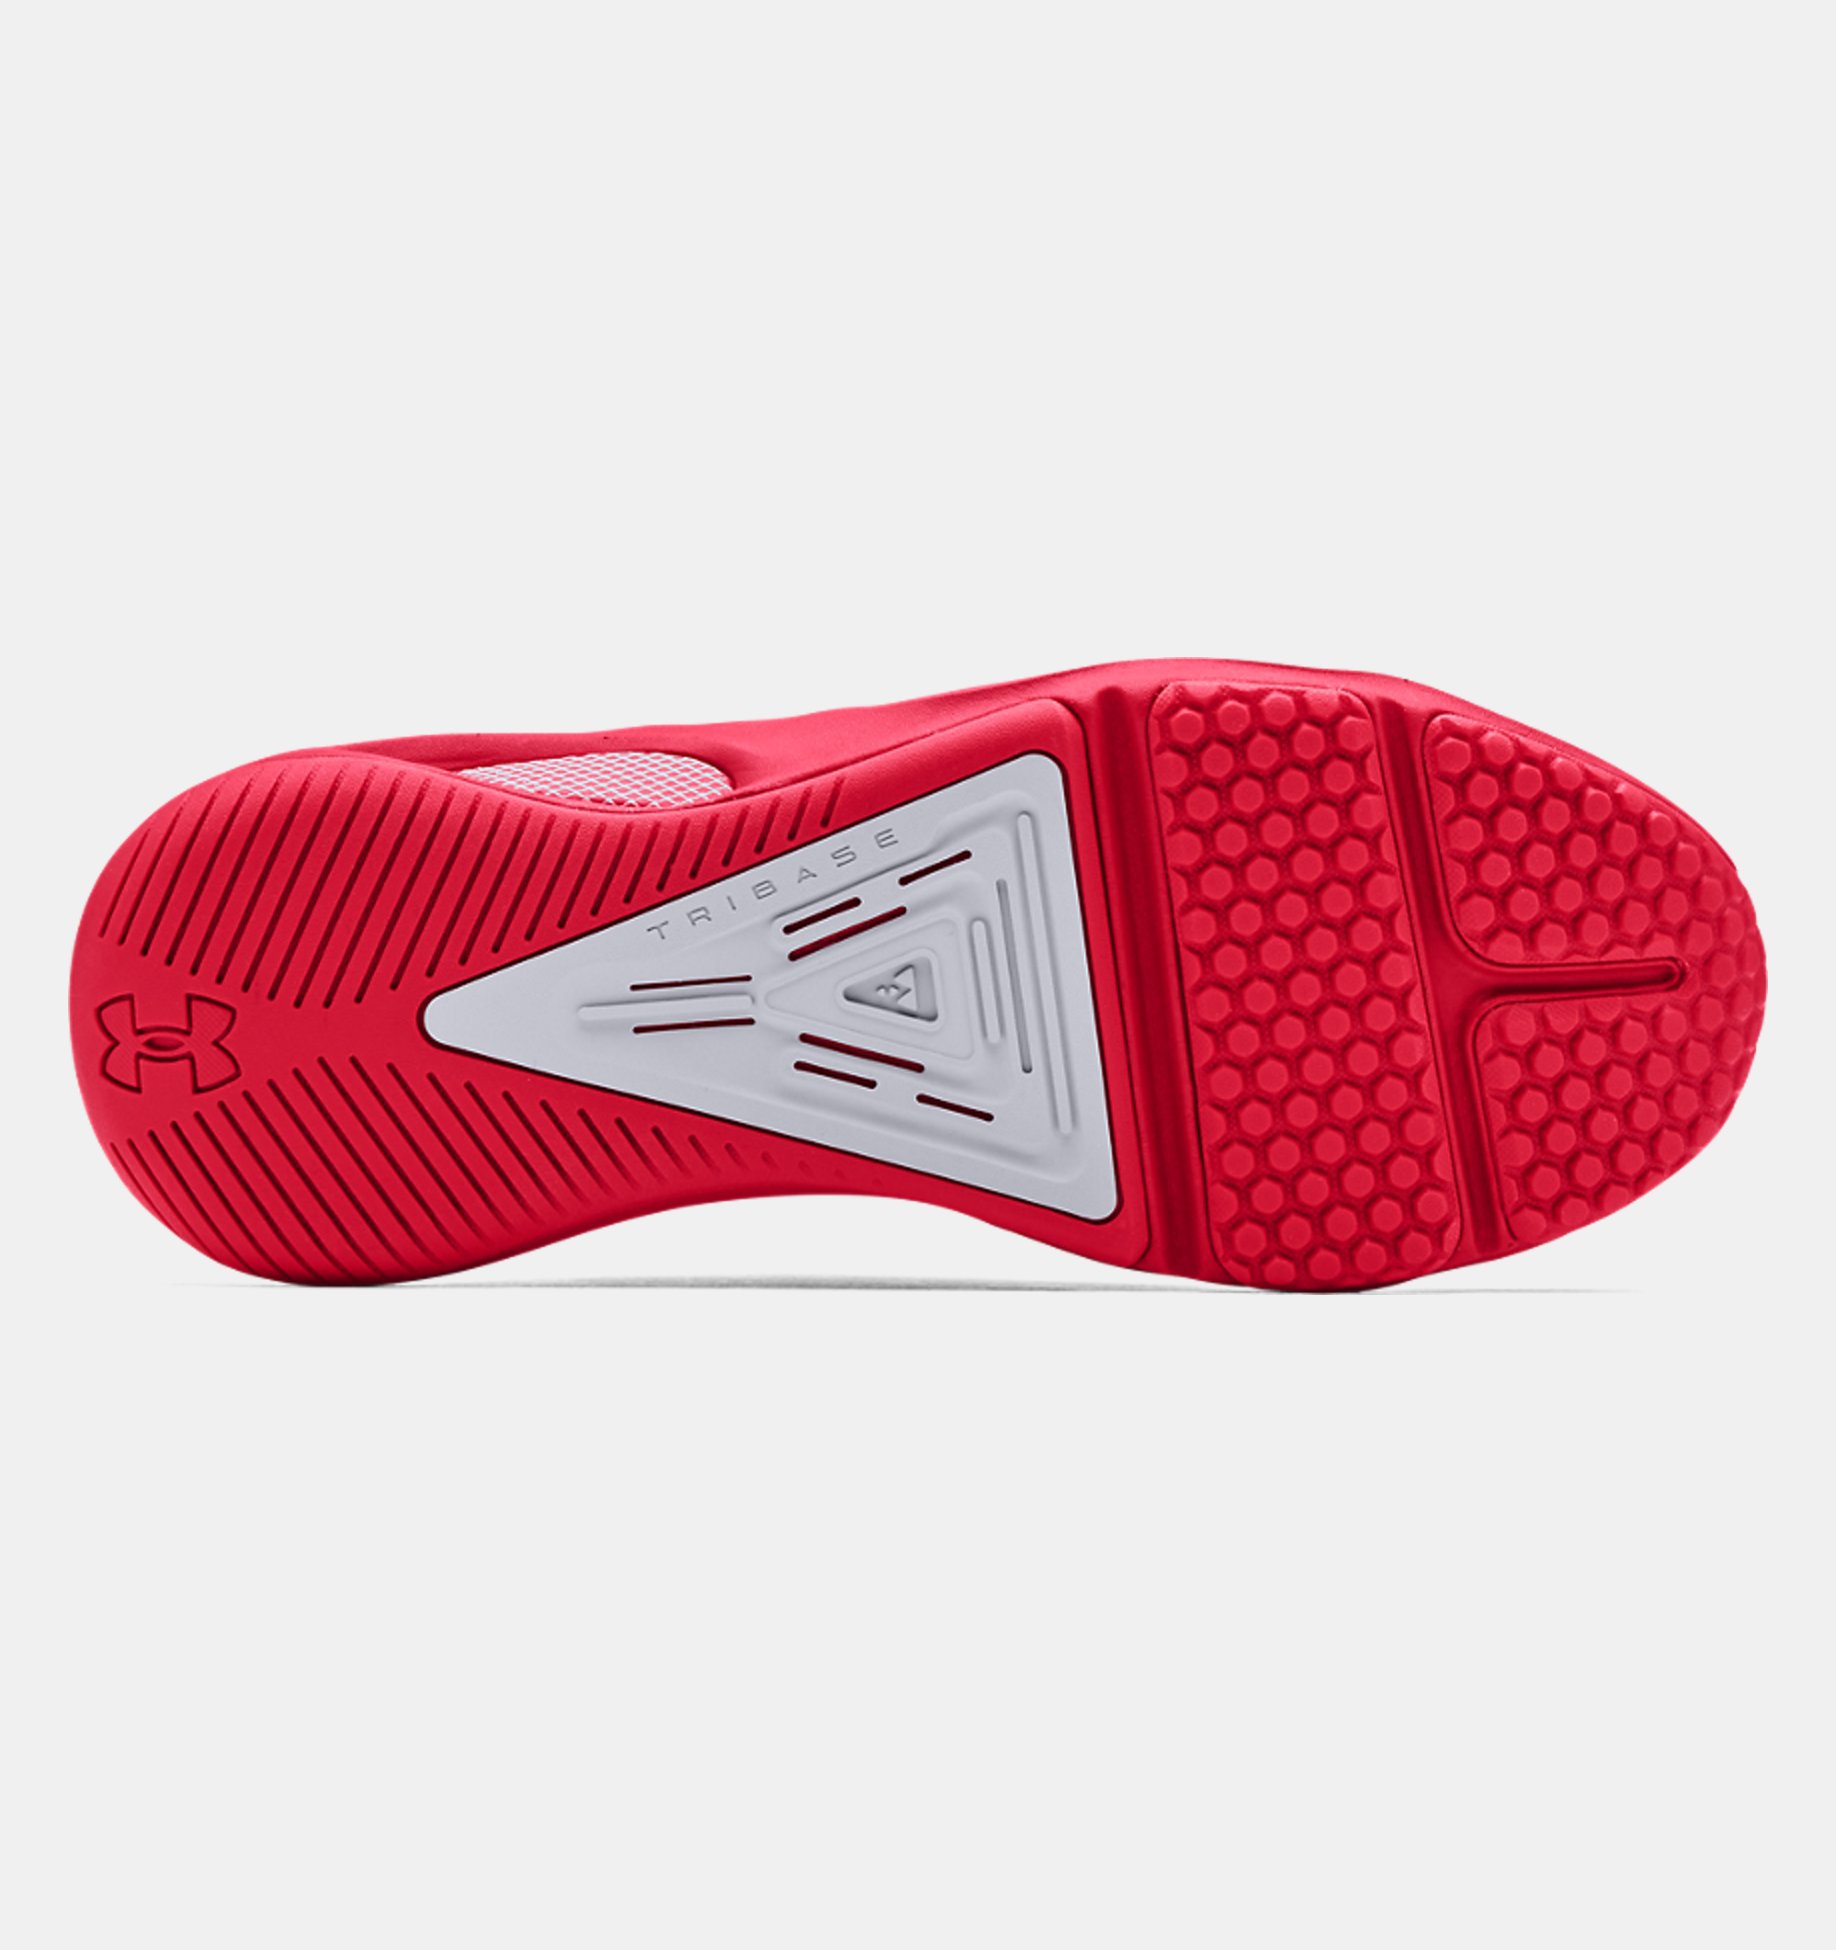 Under Armour HOVR Rise Mens Training Shoes Red 